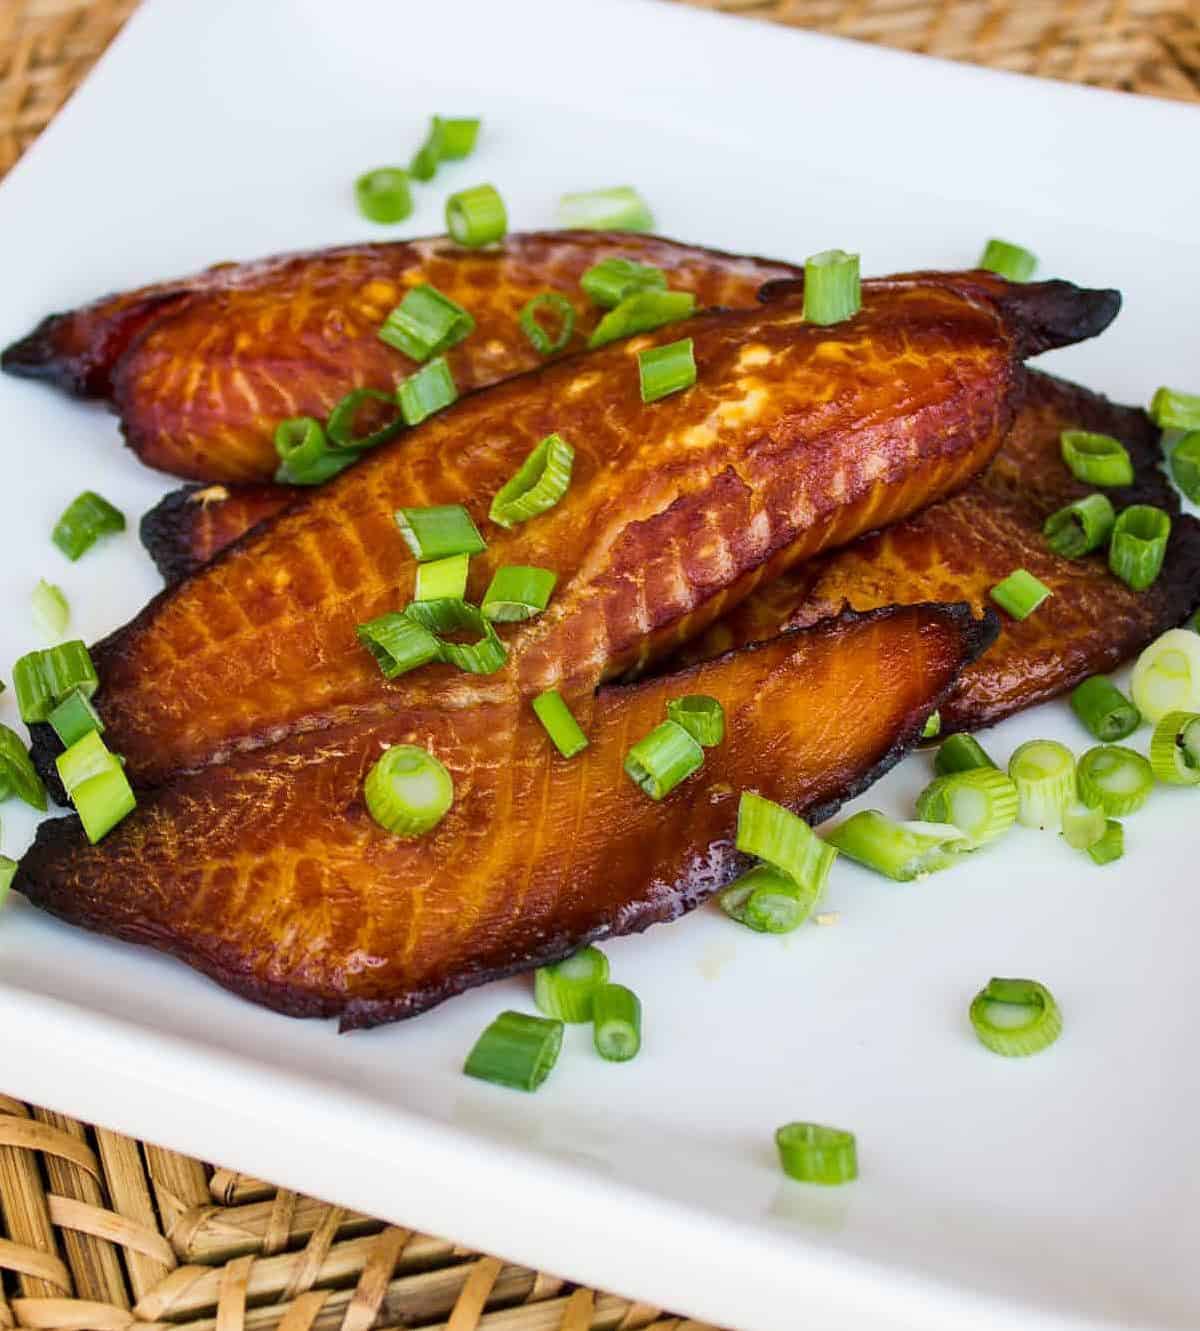  A mouthwatering smoked tilapia dish that will leave everyone wanting seconds.